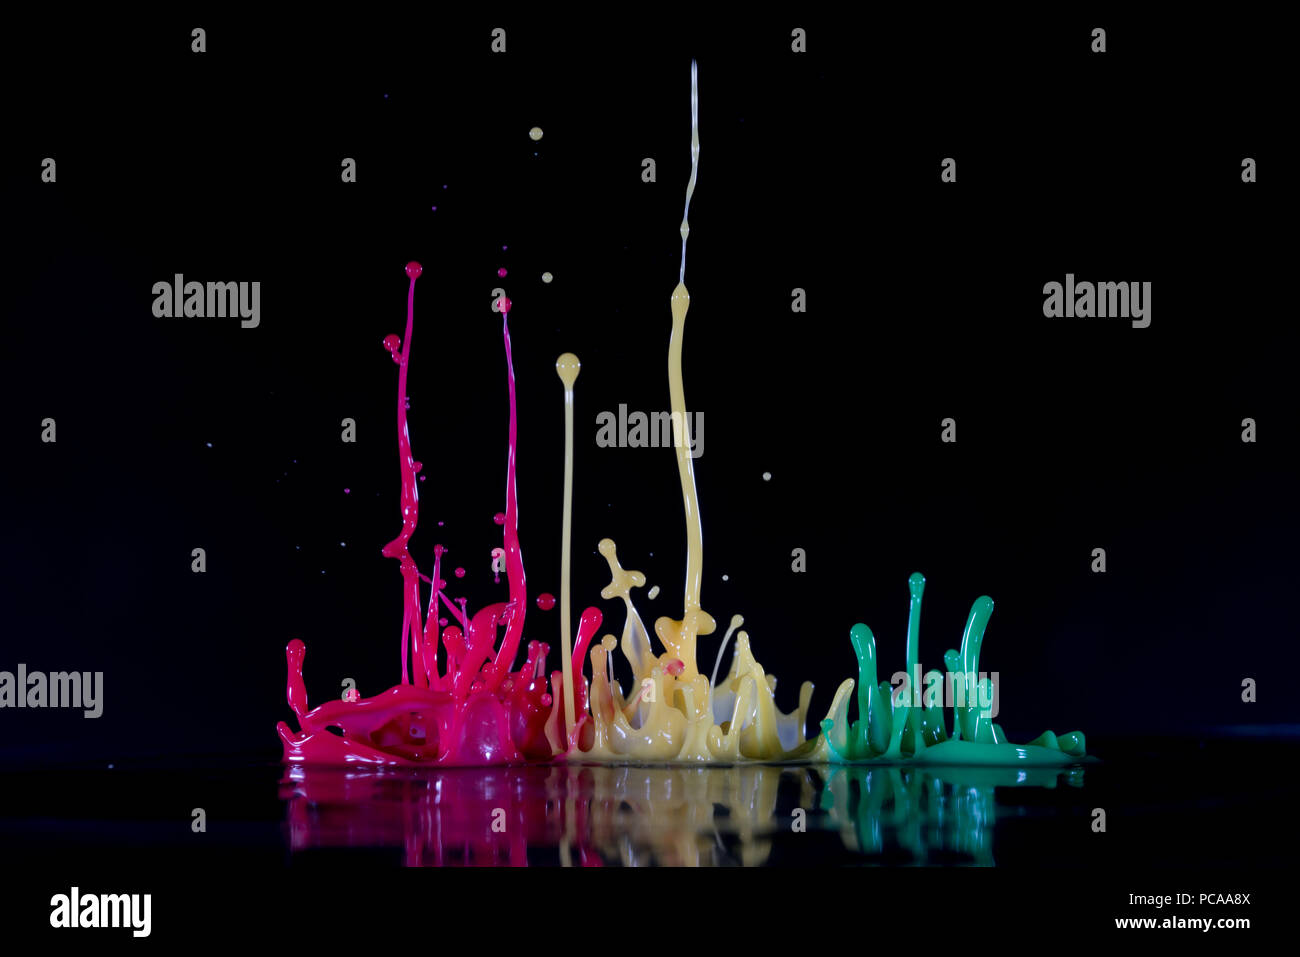 Pastel Pink Background Black Dripping Paint Stock Photo 1168567195